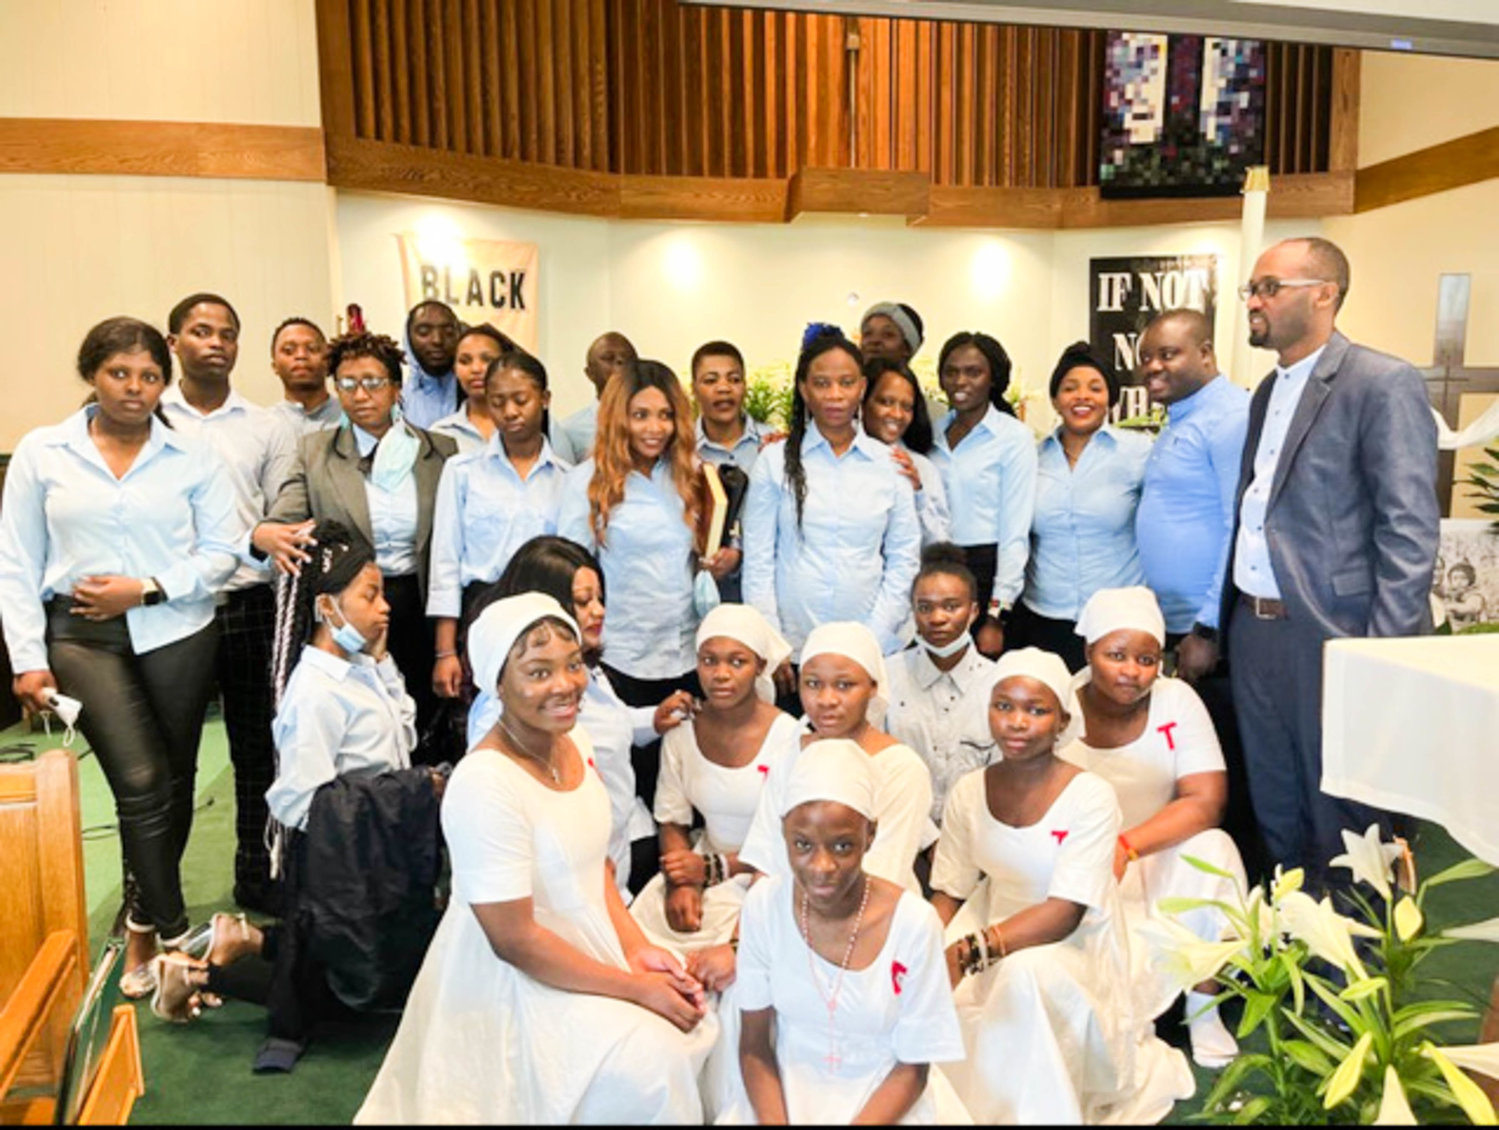 The Saint Anuaritte Congolee Choir from All Saints Catholic Church in Syracuse will sing Oct. 29 at the YMCA of the Greater Tri-Valley’s annual Prayer Breakfast. Their performance will reflect the event’s theme of love and encouragement.